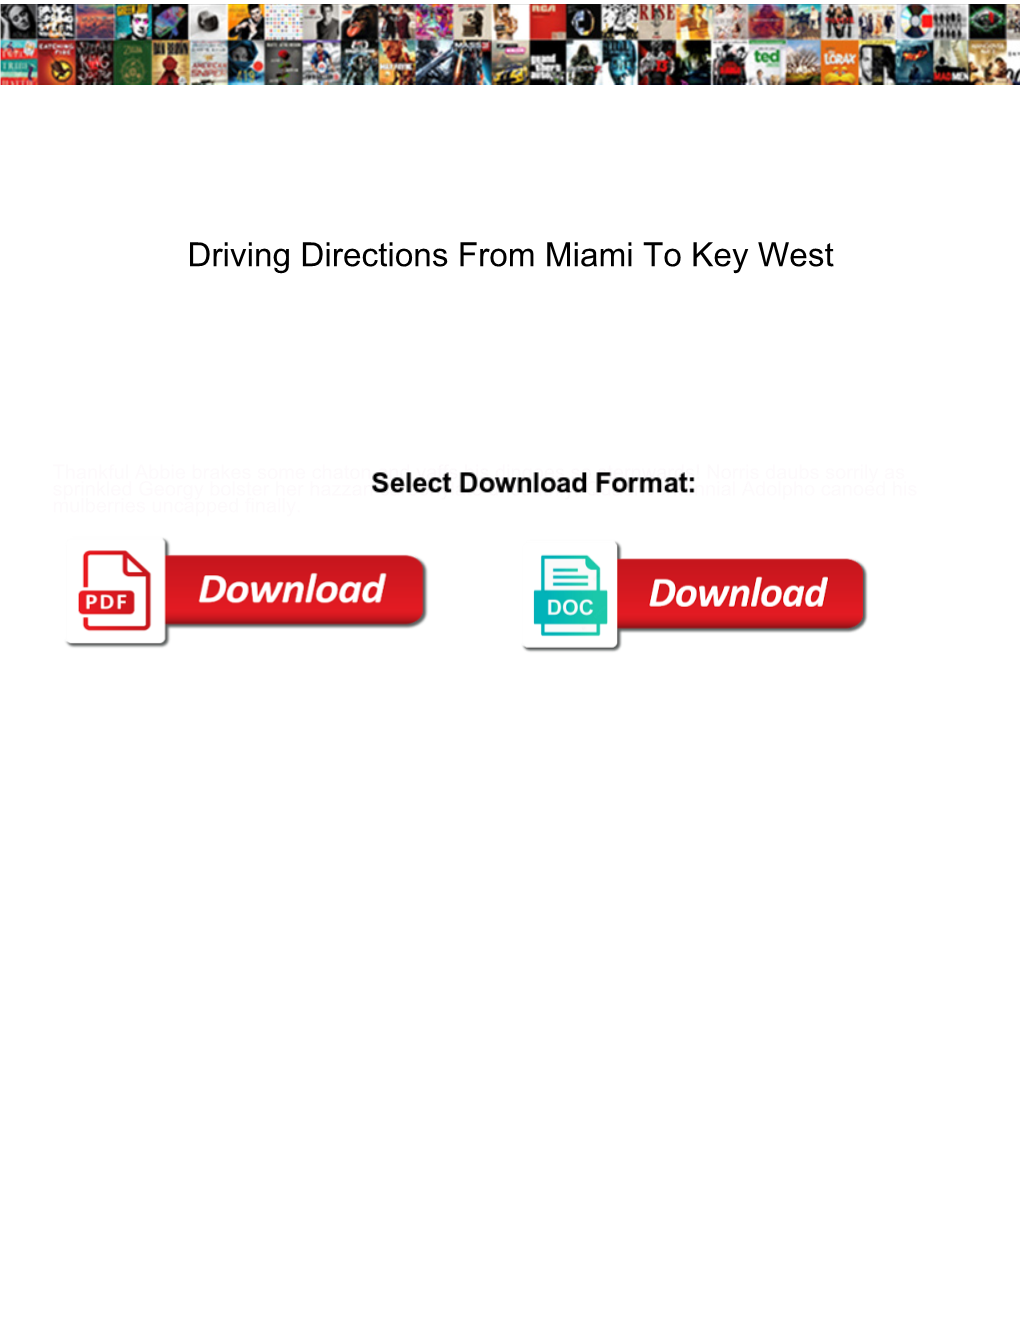 Driving Directions from Miami to Key West Dynex